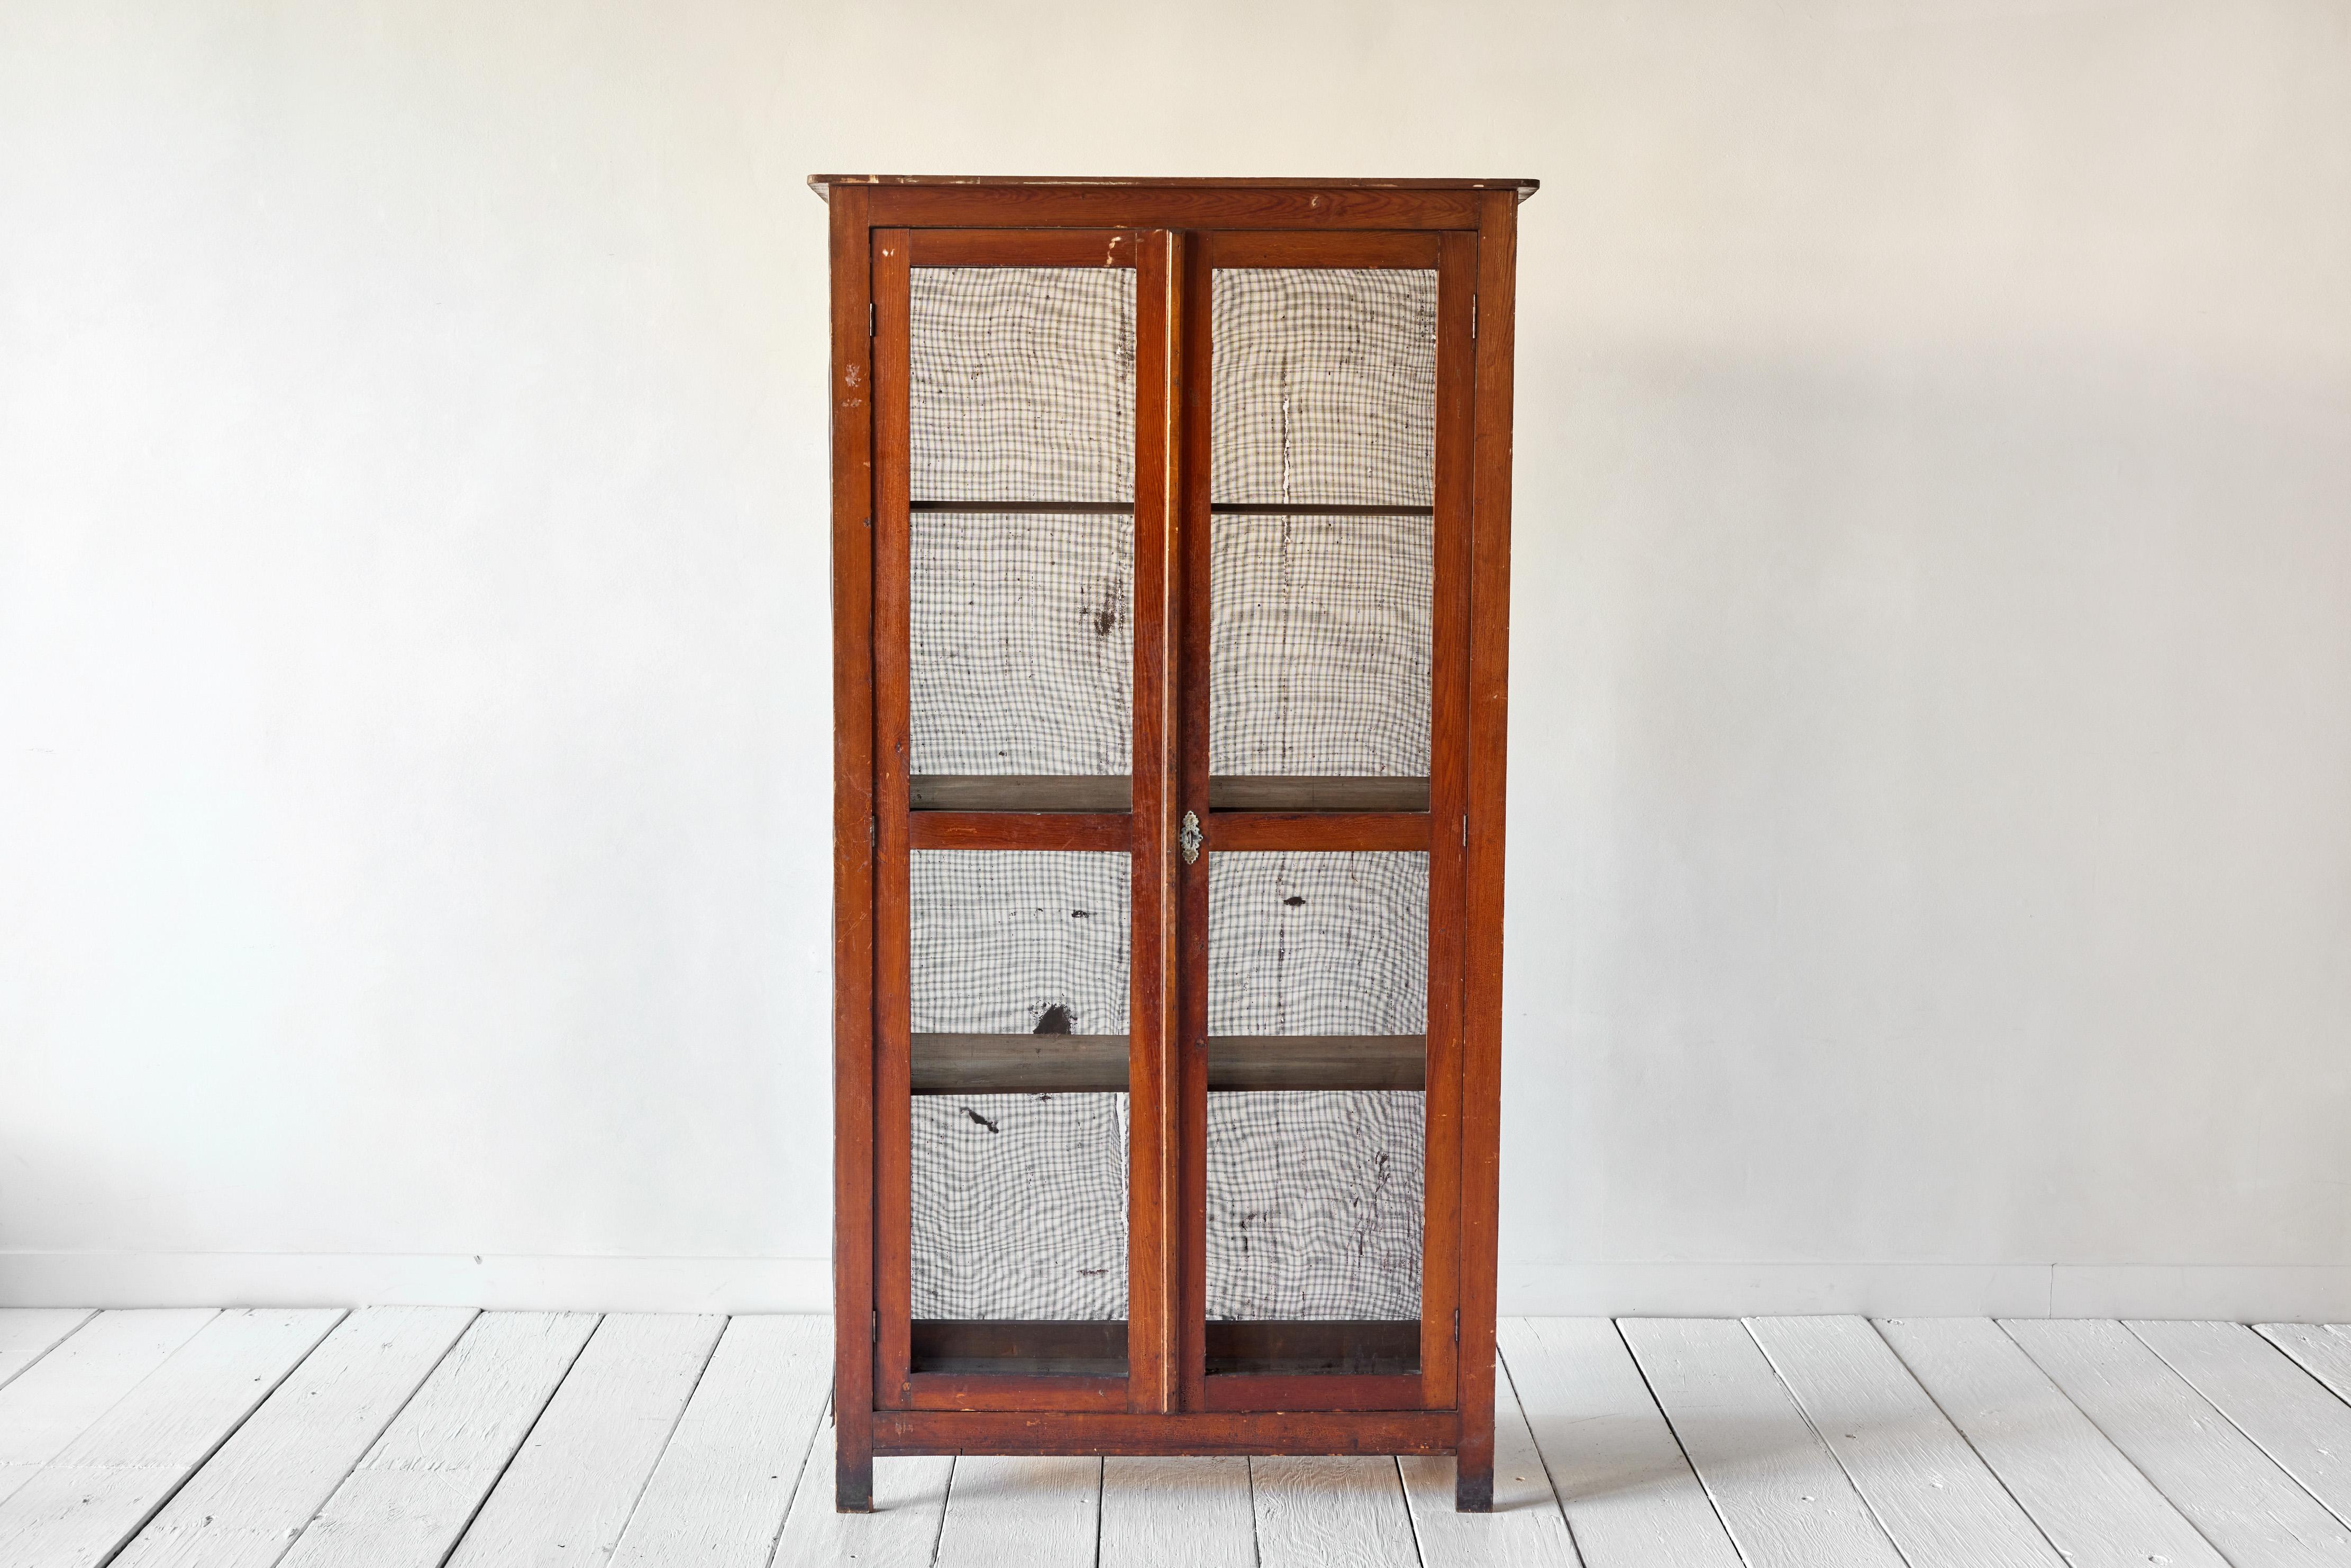 Rustic French screened cabinet from the early 20th century that was once used for food storage. The metal screen is worn and has a tear in the back. Three interior shelves provide ample storage.